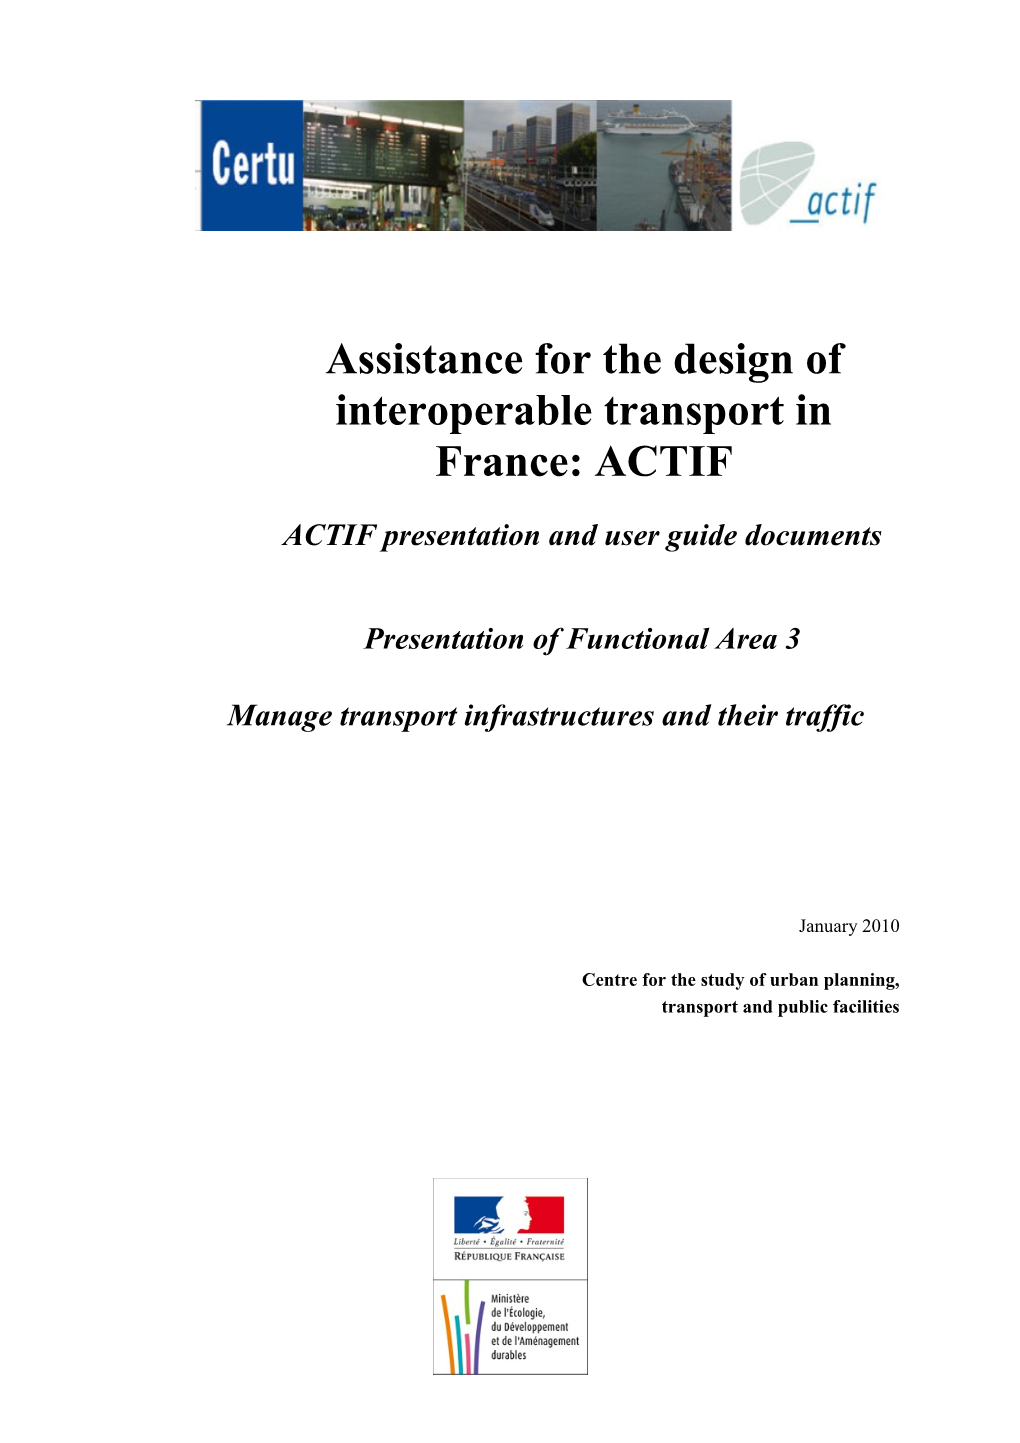 Assistance for the Design of Interoperable Transport in France: ACTIF